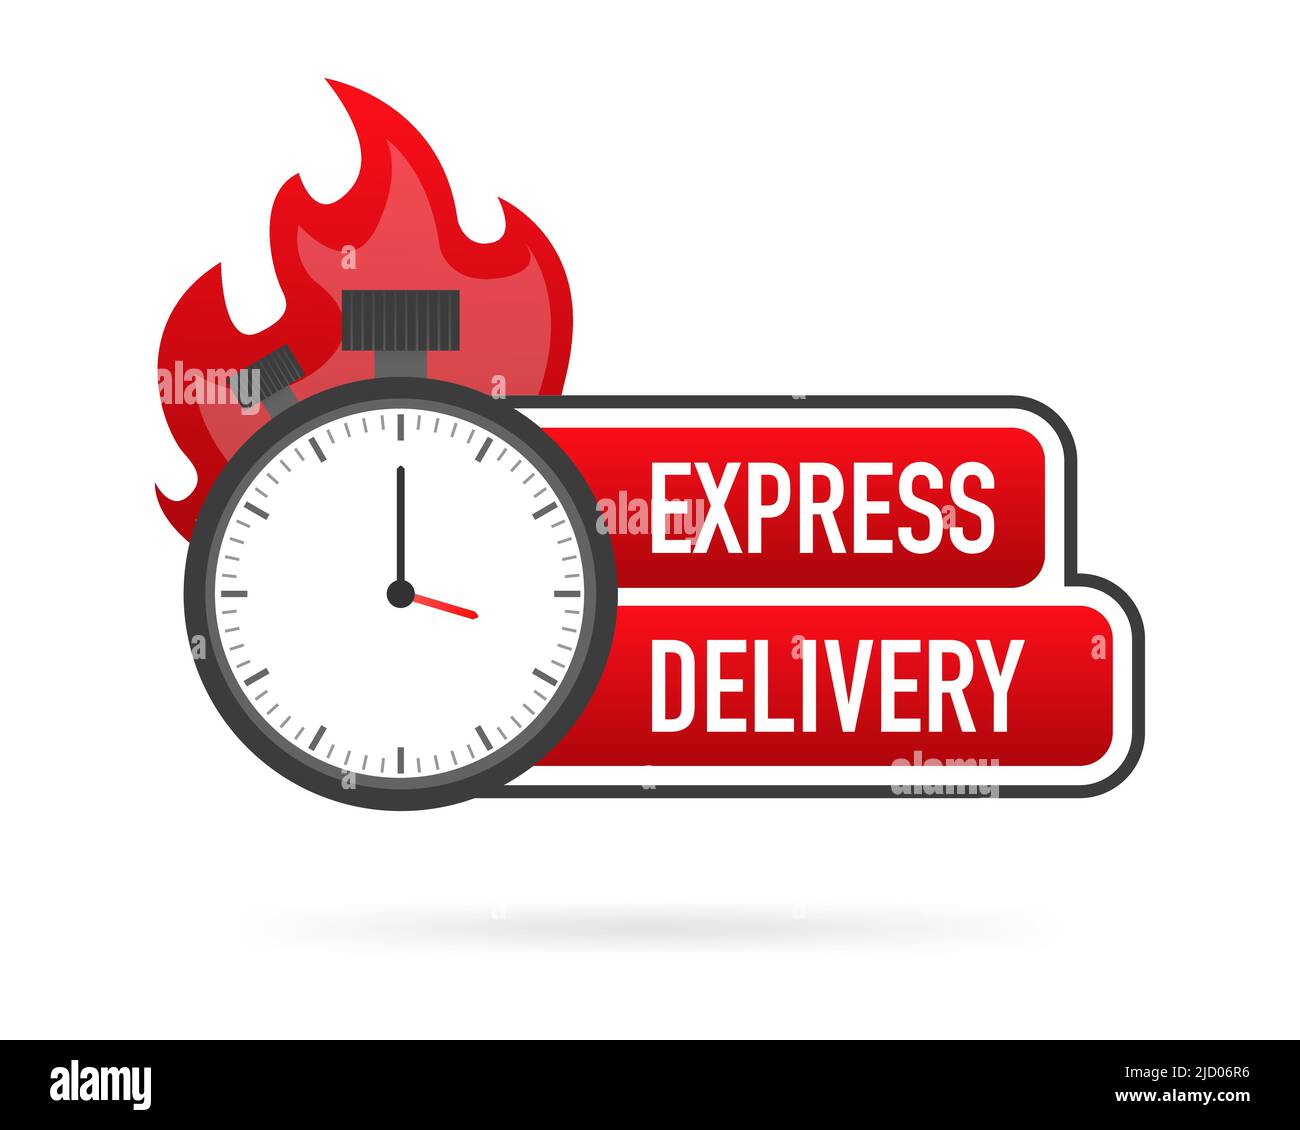 Express delivery service badge. Fast time delivery order with stopwatch on white background. Vector illustration. Stock Vector